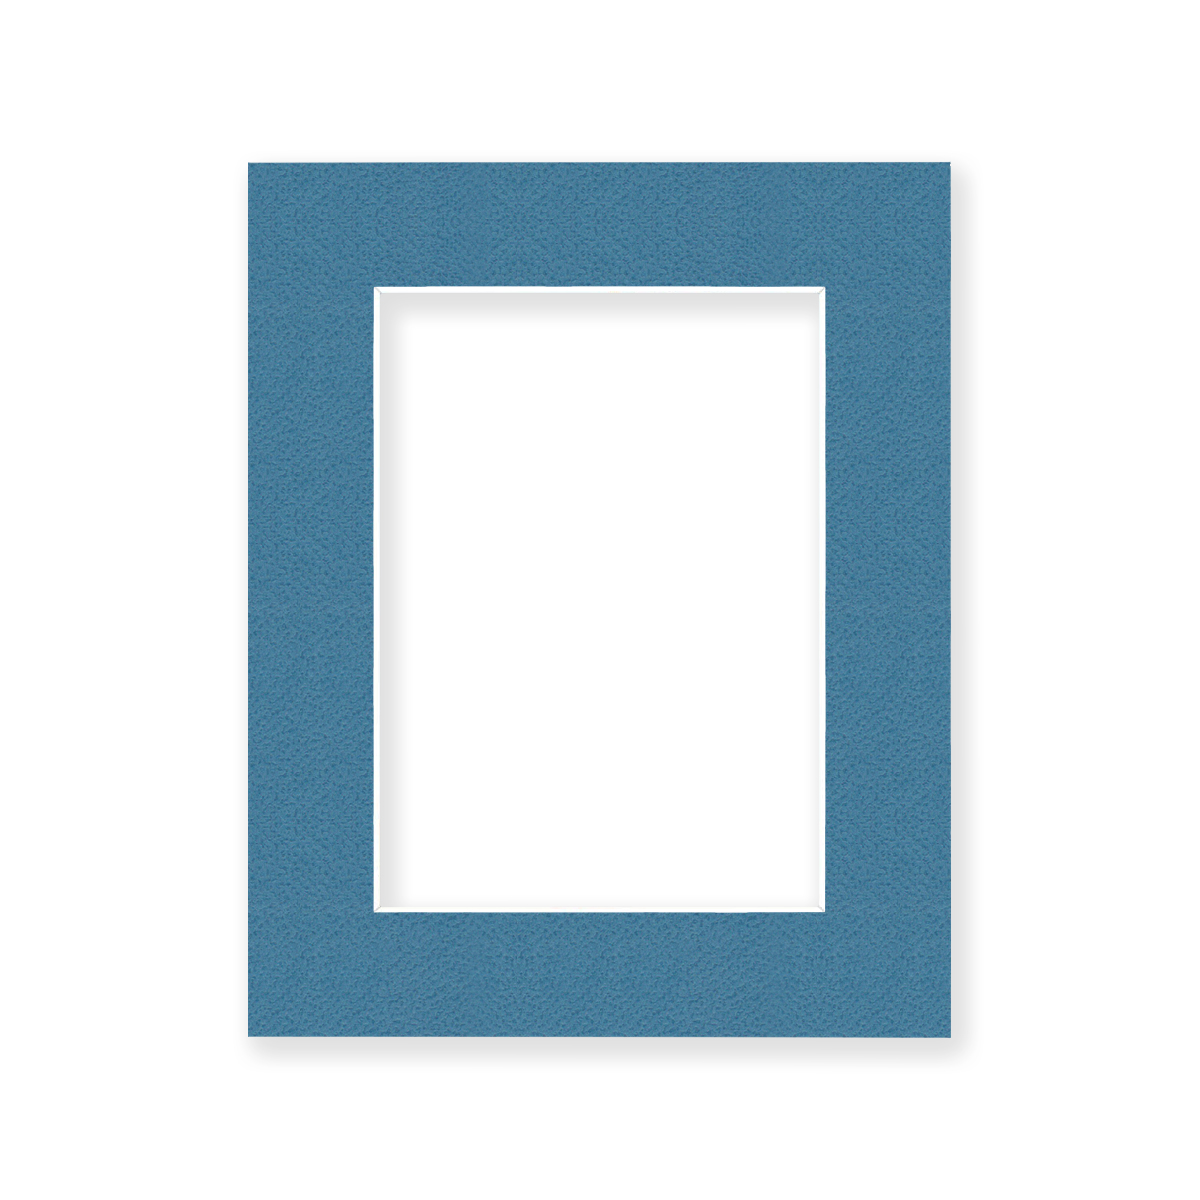 Picture Frame Arch Top Mat 8x10 for 5x7 photo medium blue single